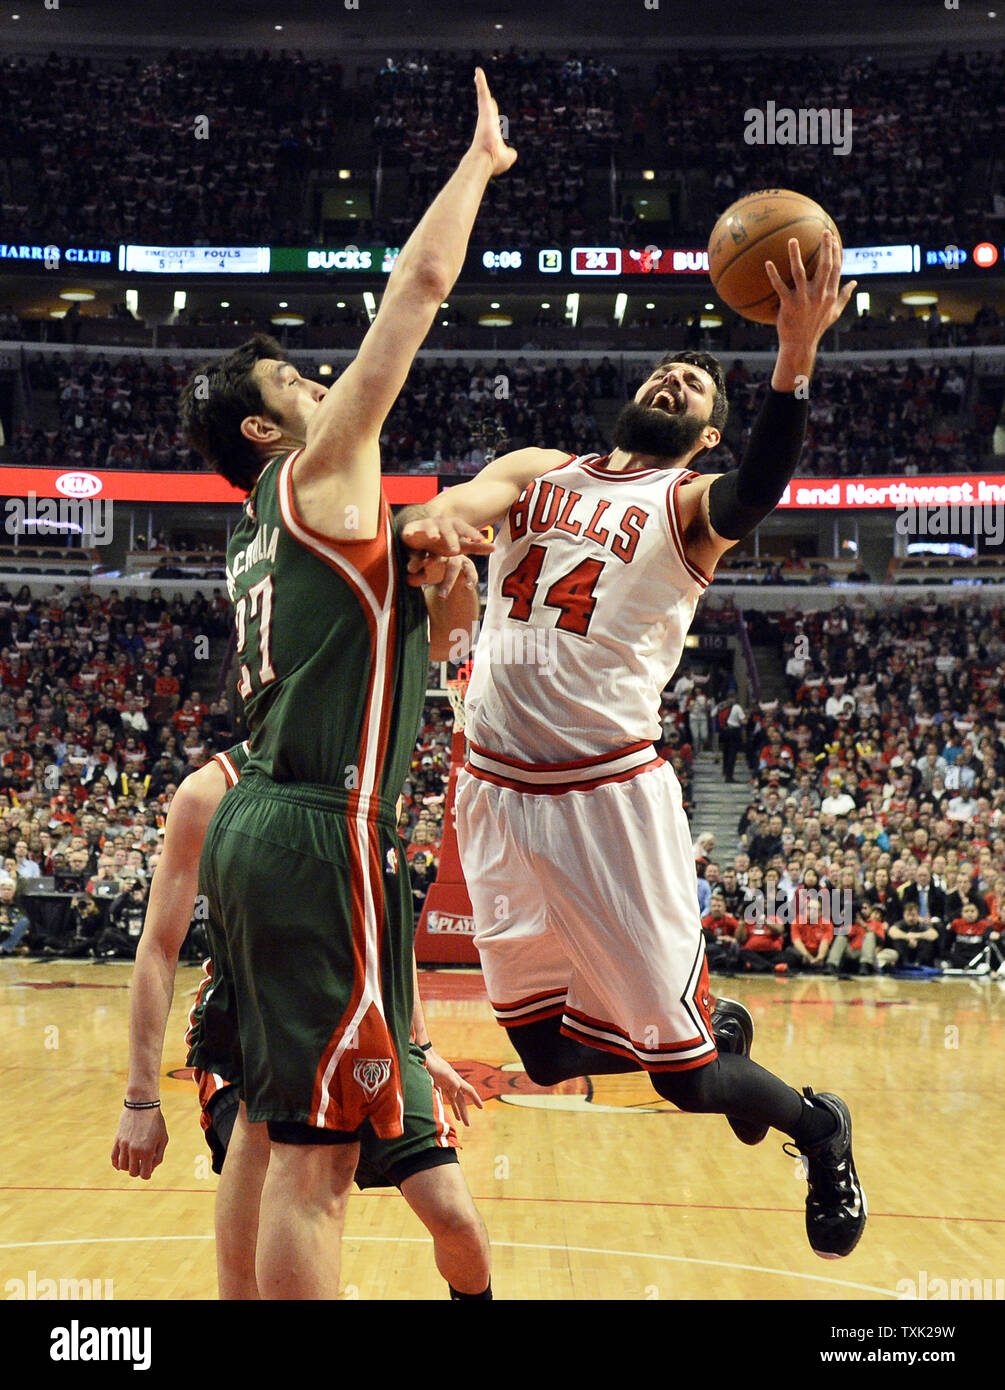 Chicago Bulls forward Nikola Mirotic (R) drives to the basket as Milwaukee Bucks center Zaza Pachulia defends during the second quarter of game 2 the first round of the NBA Playoffs at the United Center on April 20, 2015 in Chicago. The Bulls defeated the Bucks 91-82 and lead the best of seven series 2-0.     Photo by Brian Kersey/UPI Stock Photo